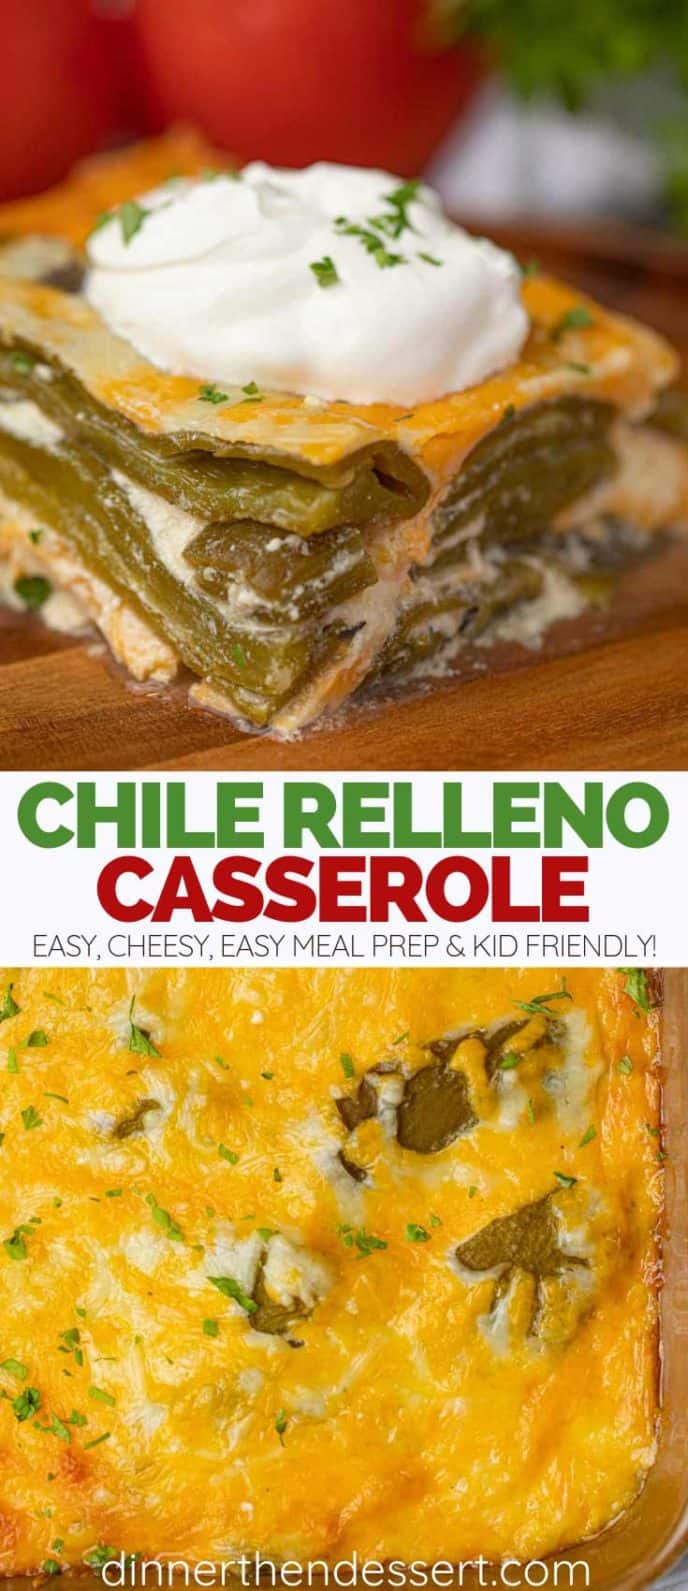 Collage Photos of Chile Relleno Casserole Slice and Pan